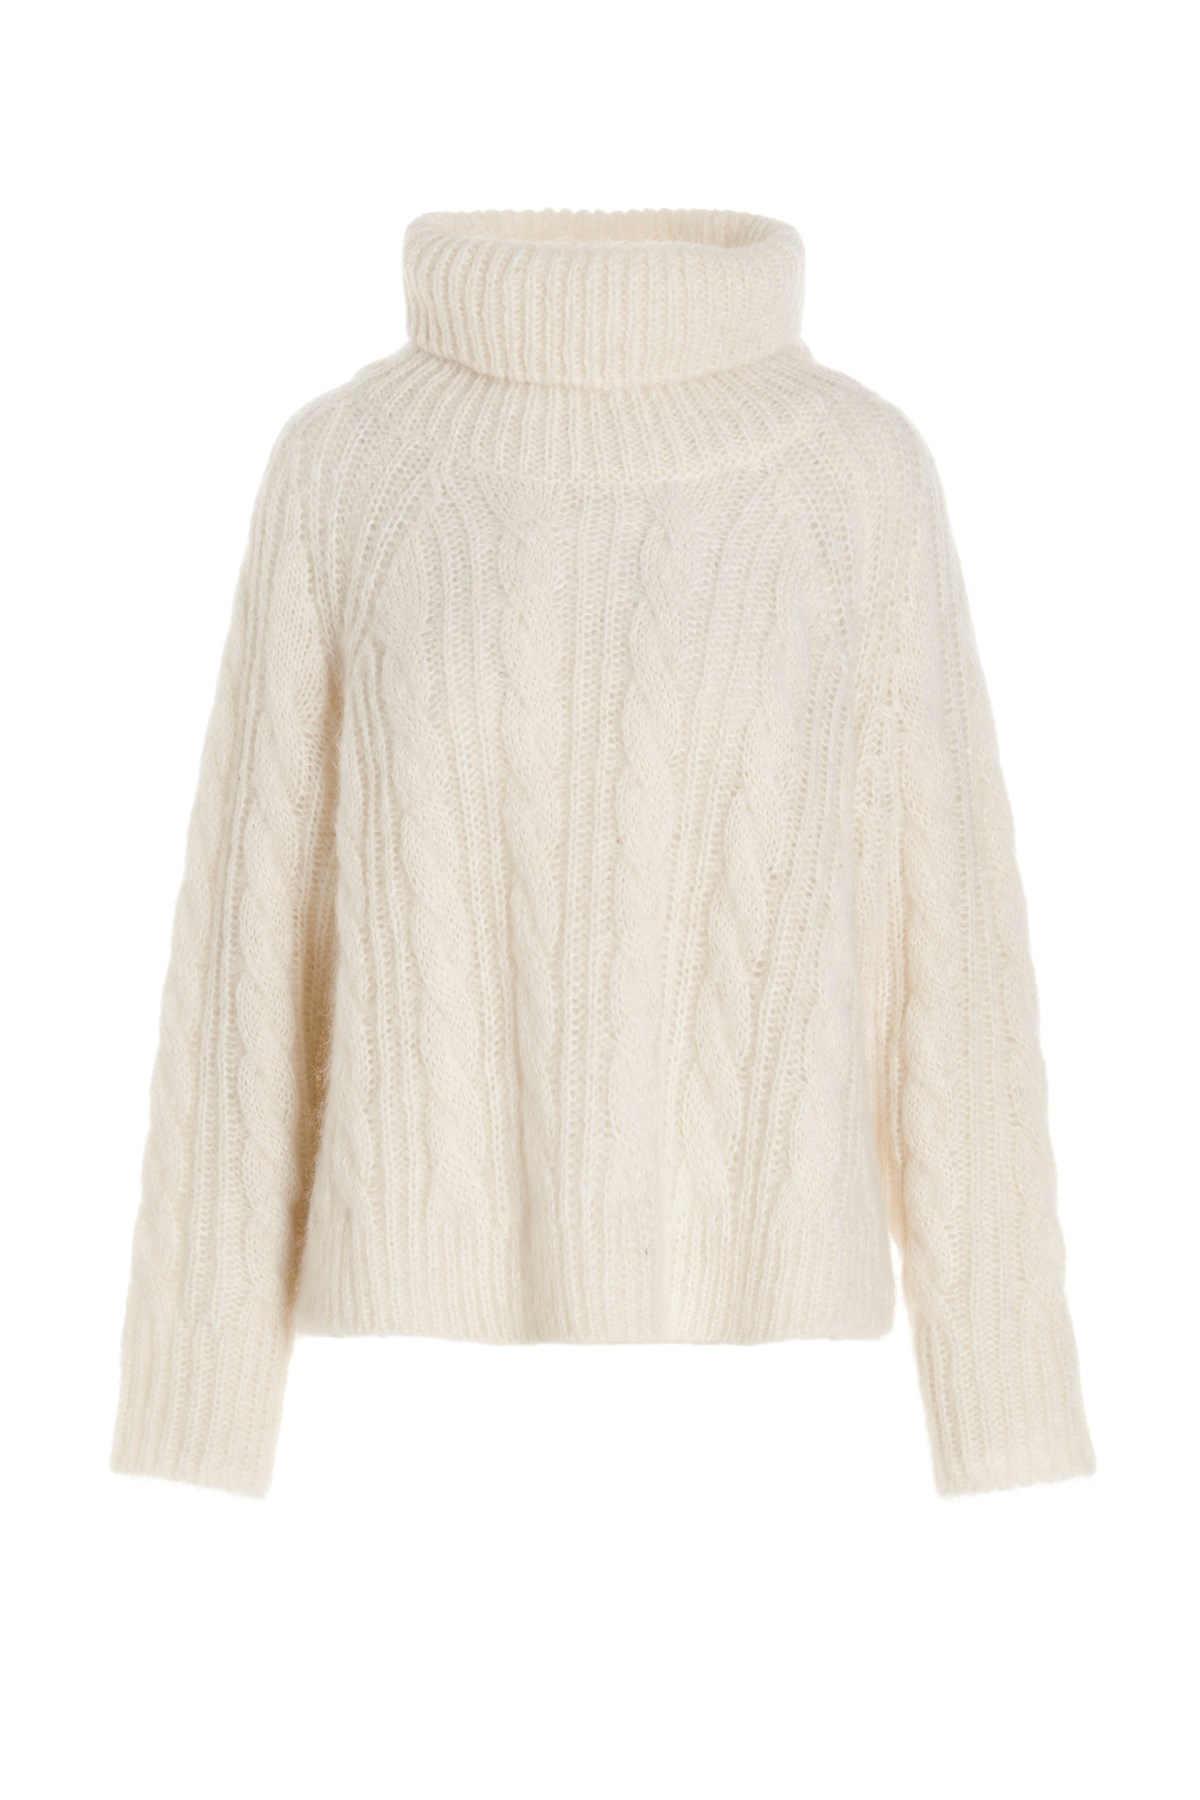 CECILIE BAHNSEN Cable Mohair Sweater